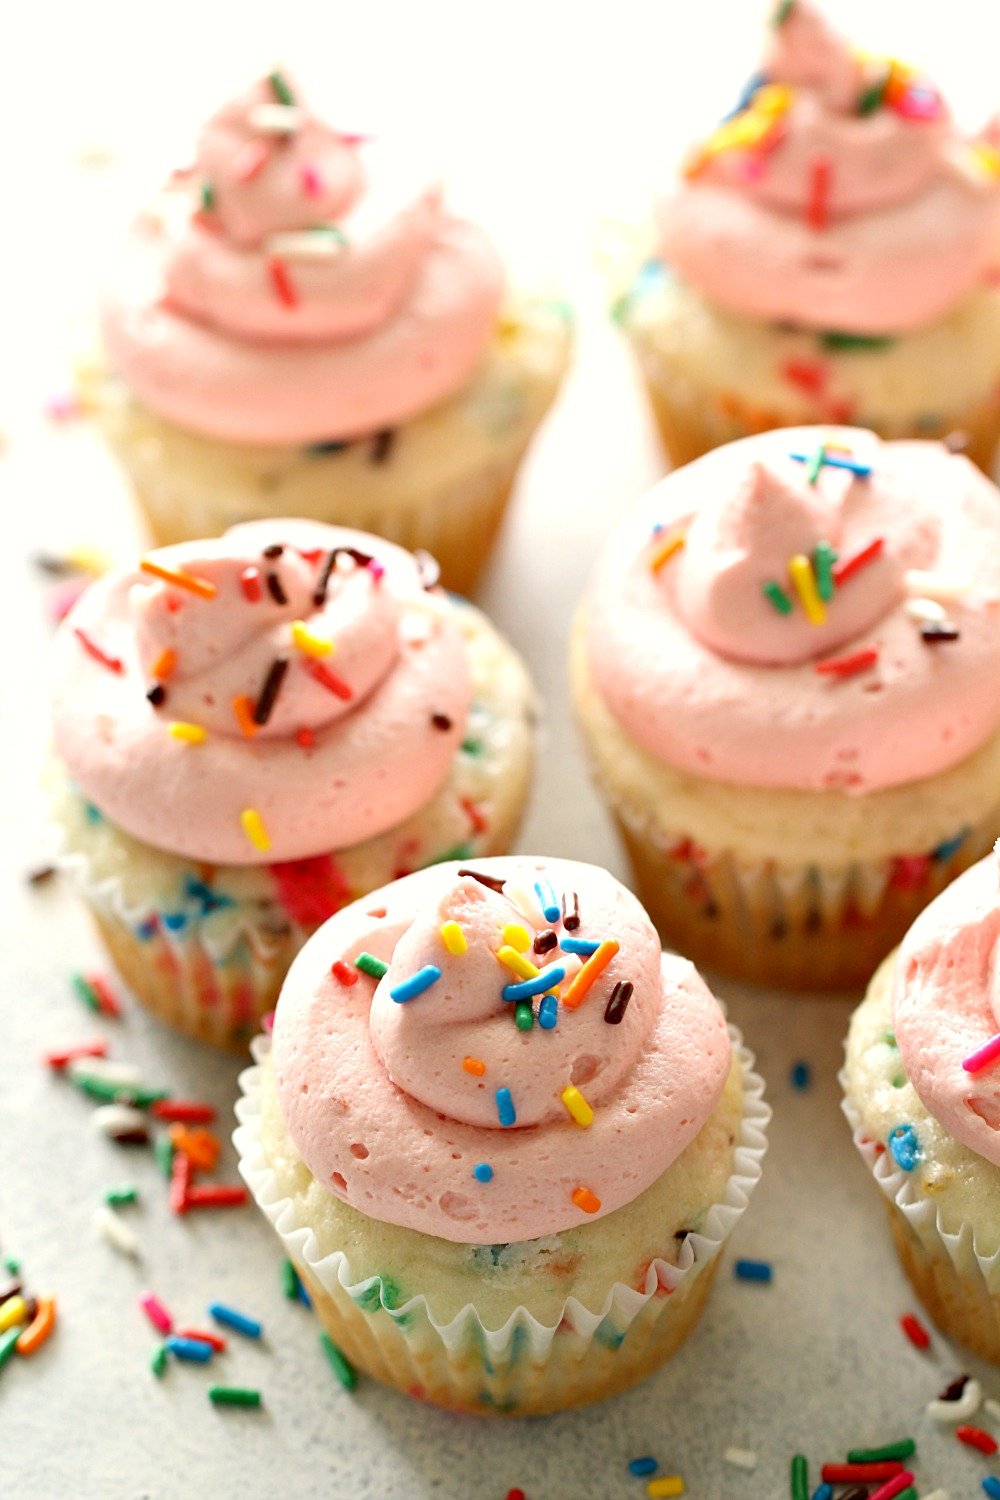 Confetti Cupcakes with Homemade Strawberry Buttercream Frosting Recipe